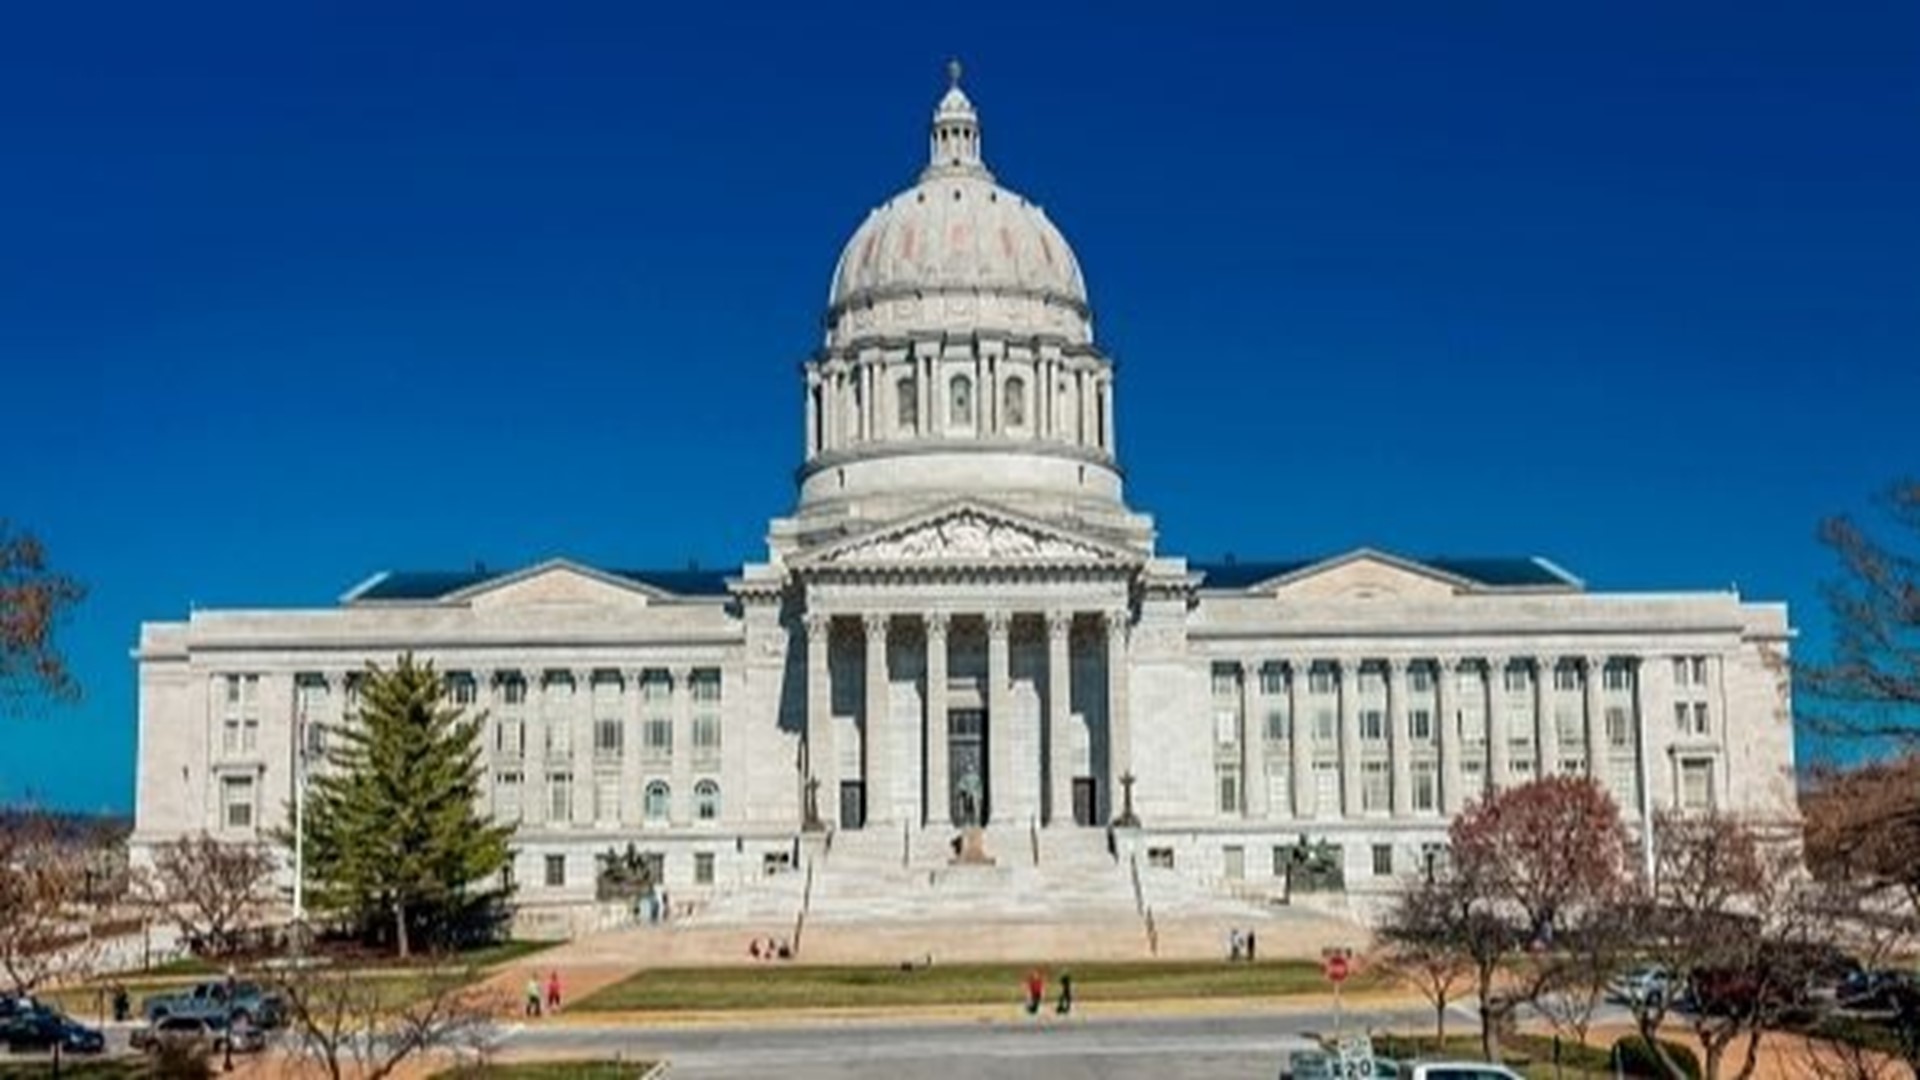 Missouri lawmakers pass ban on abortions at eight weeks, sending bill to Republican governor, who is expected to sign it.